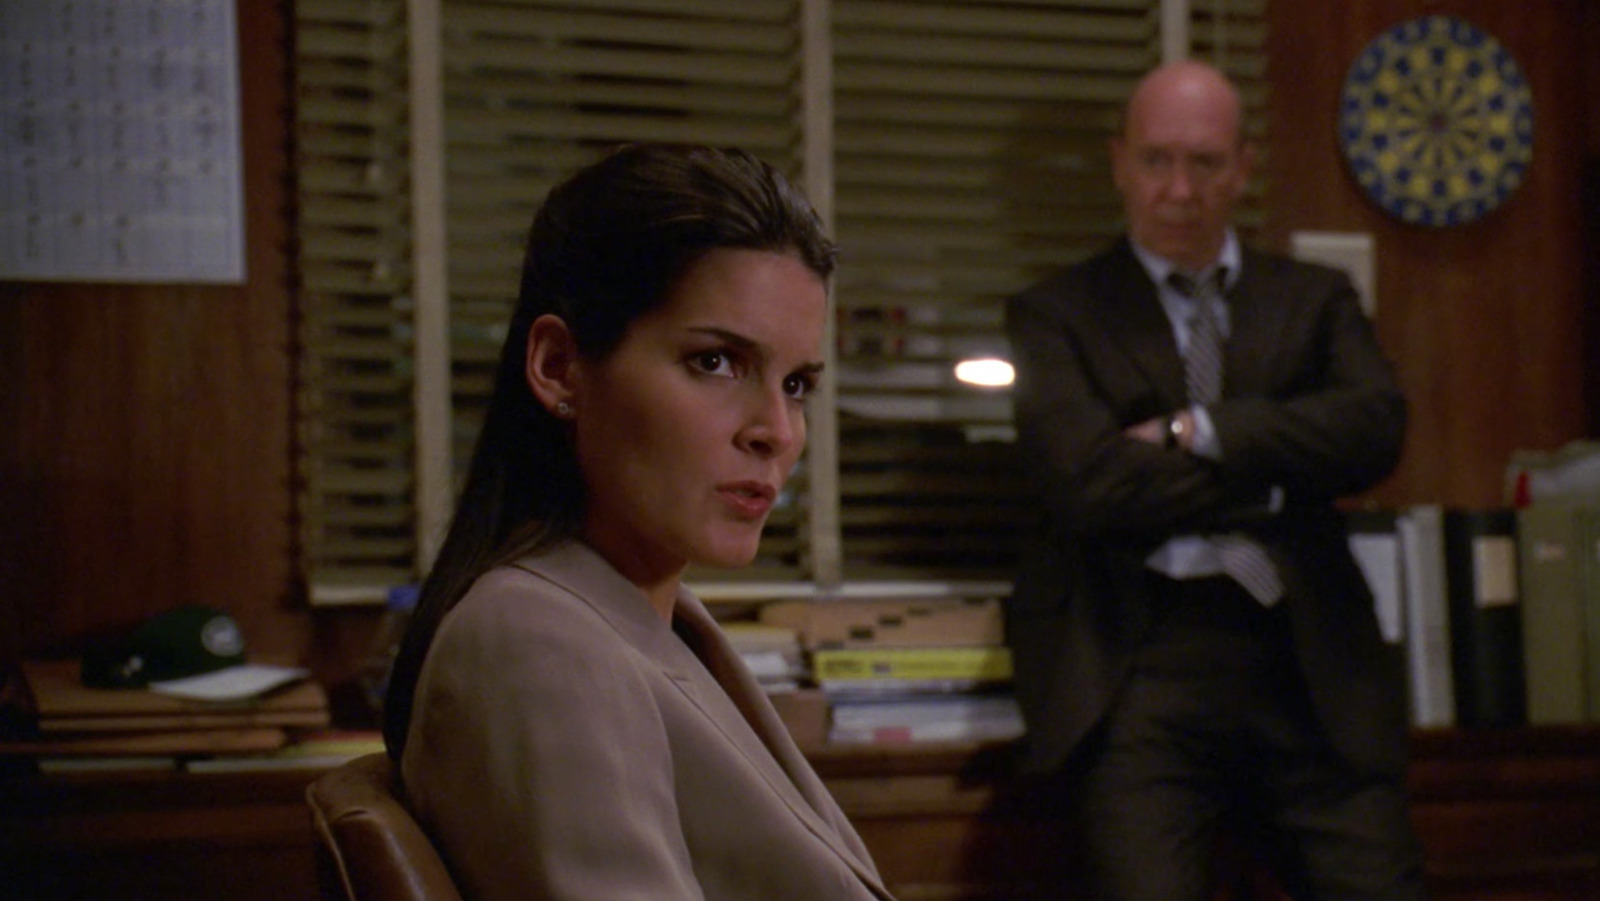 What Has Angie Harmon Been Up To Since Law & Order?